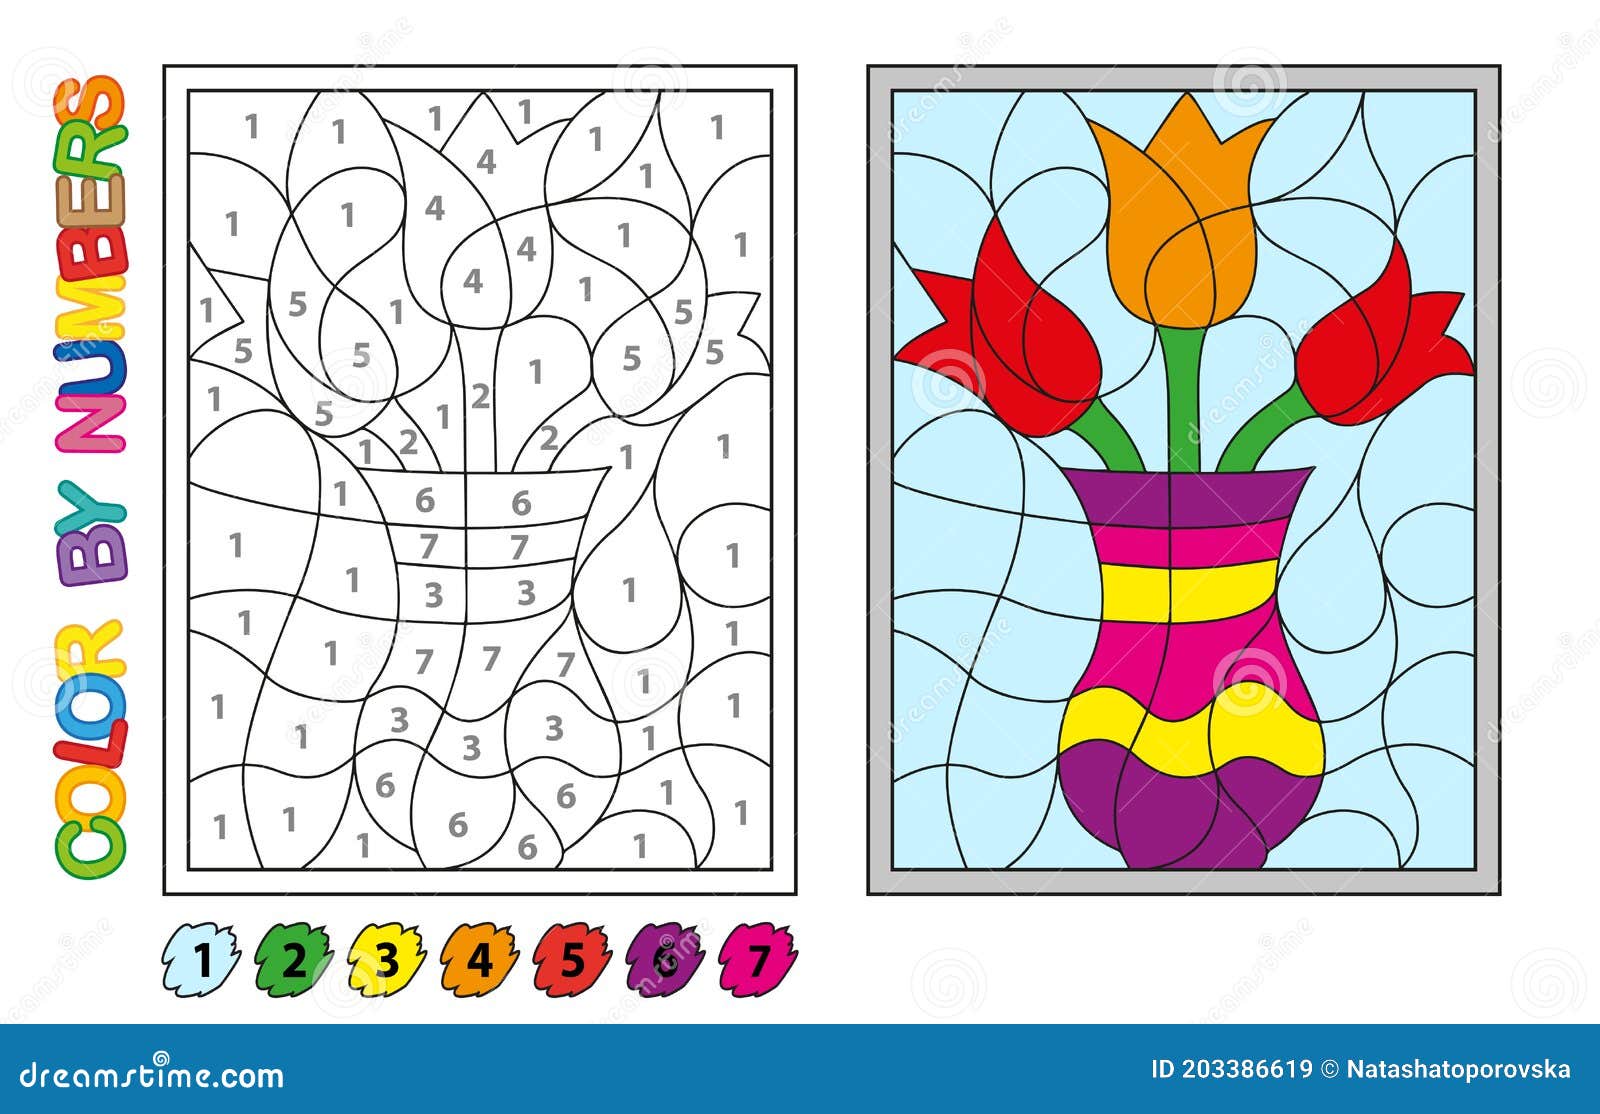 https://thumbs.dreamstime.com/z/paint-numbers-puzzle-game-children-education-colors-drawing-learning-mathematics-vector-flowers-203386619.jpg